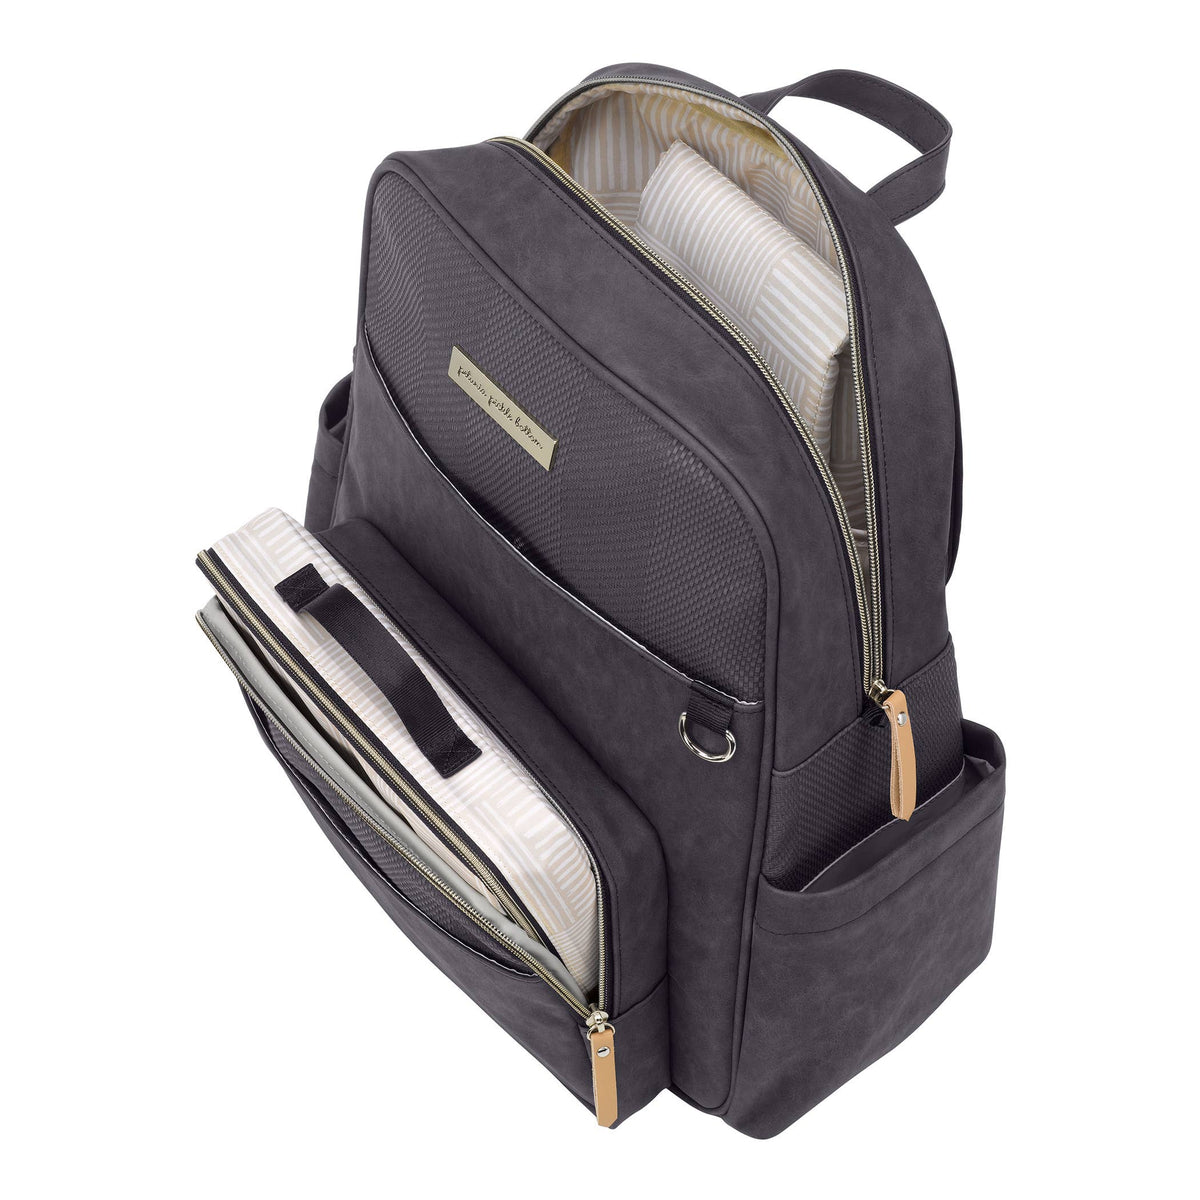 SYNC BACKPACK - CARBON CABLE STITCH